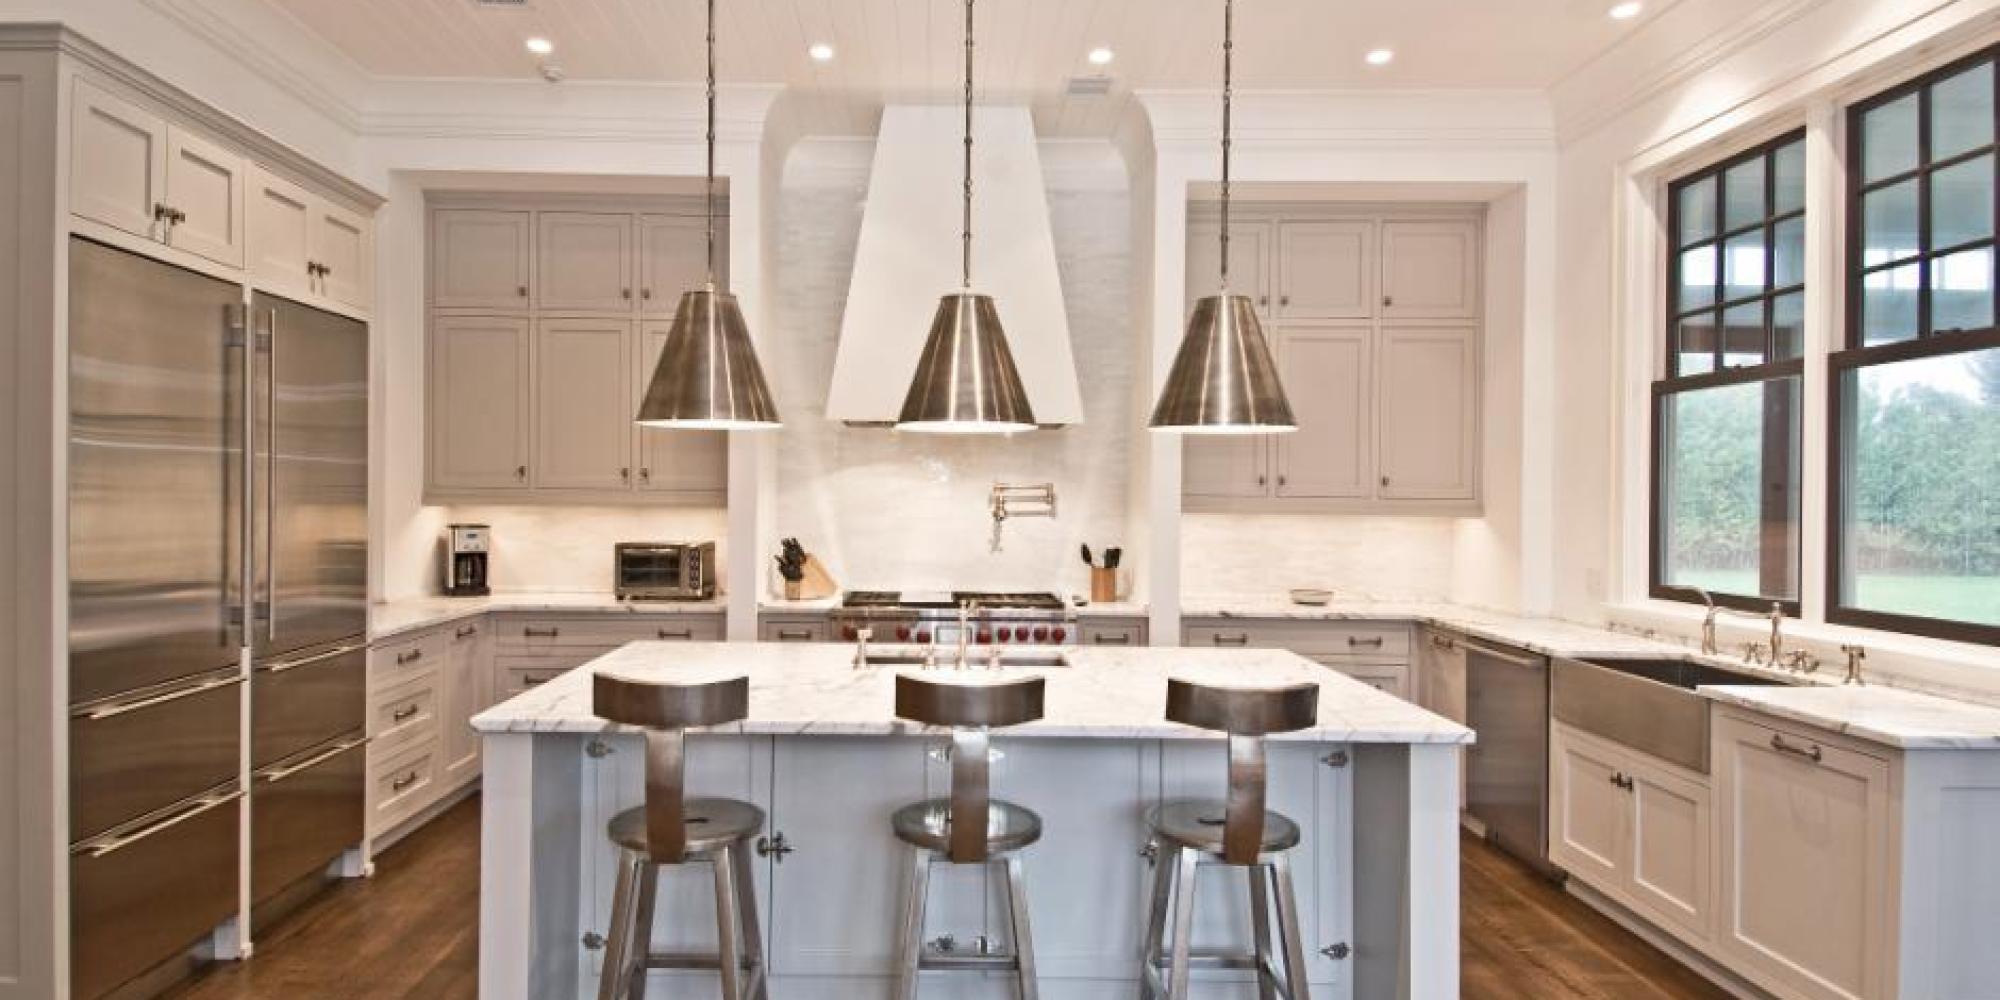 Images of The Best Paint Colors for Every Type of Kitchen | HuffPost kitchen paint colors with white cabinets